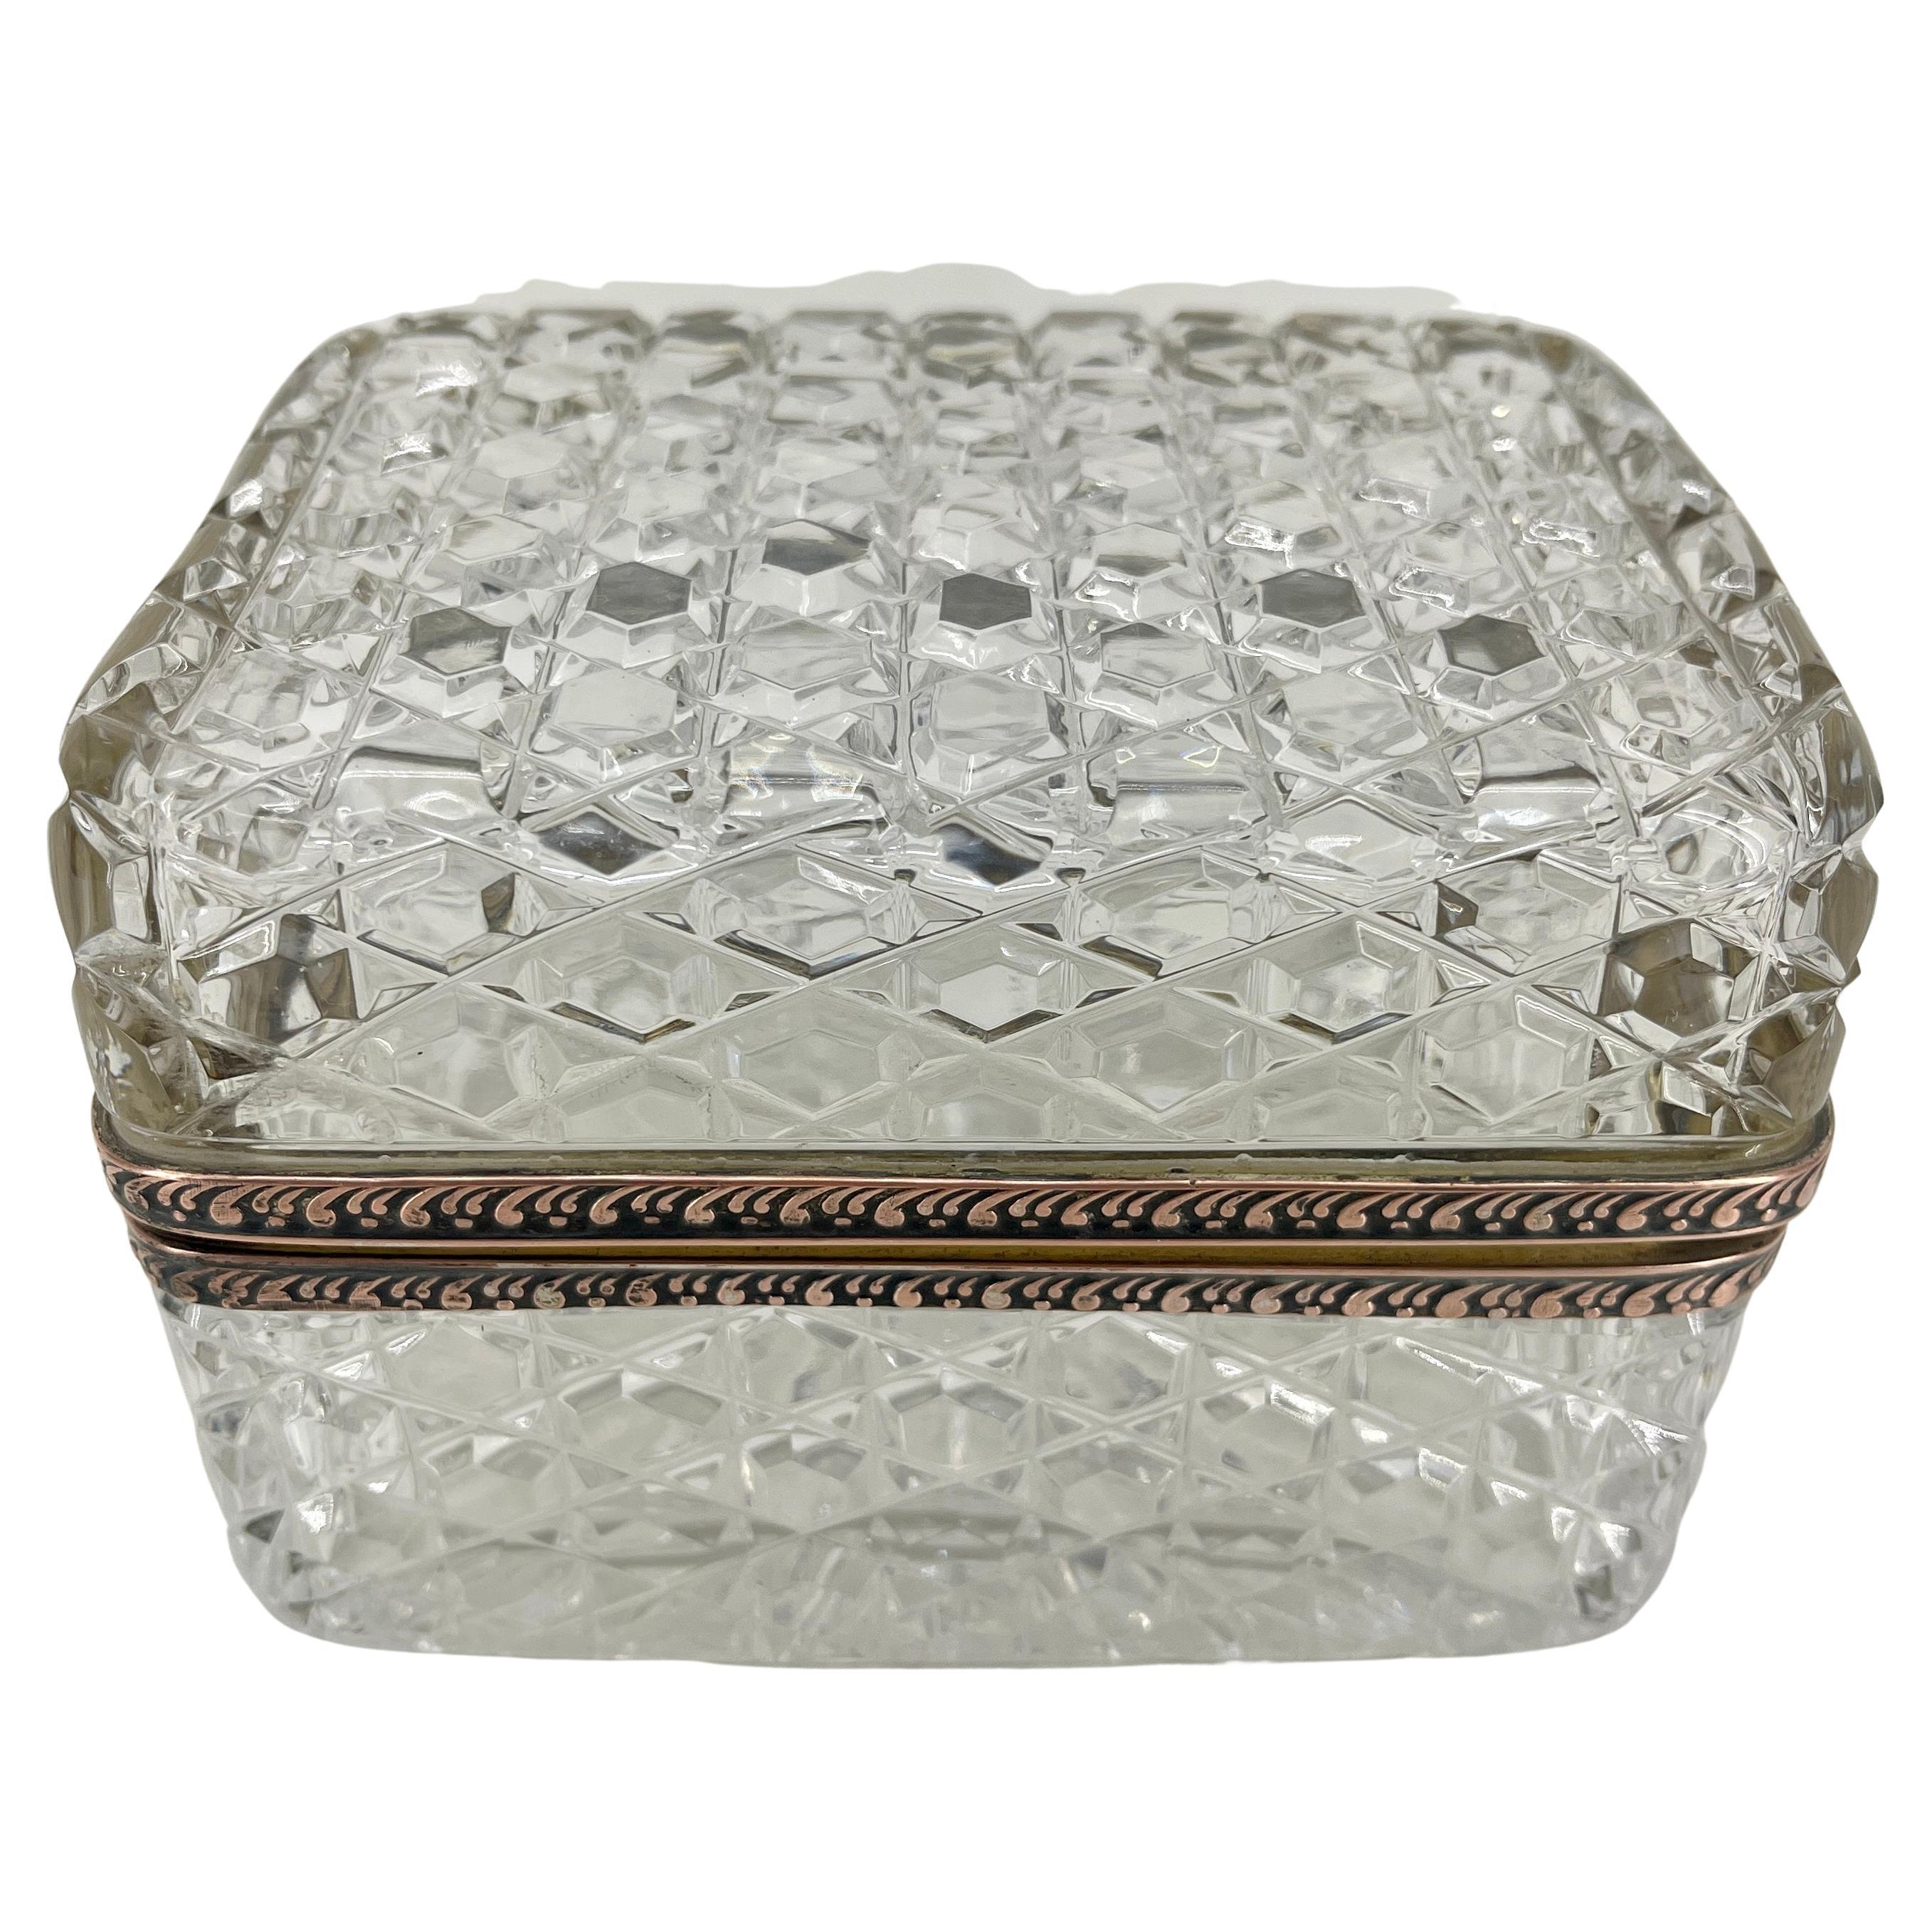 French Baccarat Style Cut Crystal Lidded Box with Brass Hardware For Sale